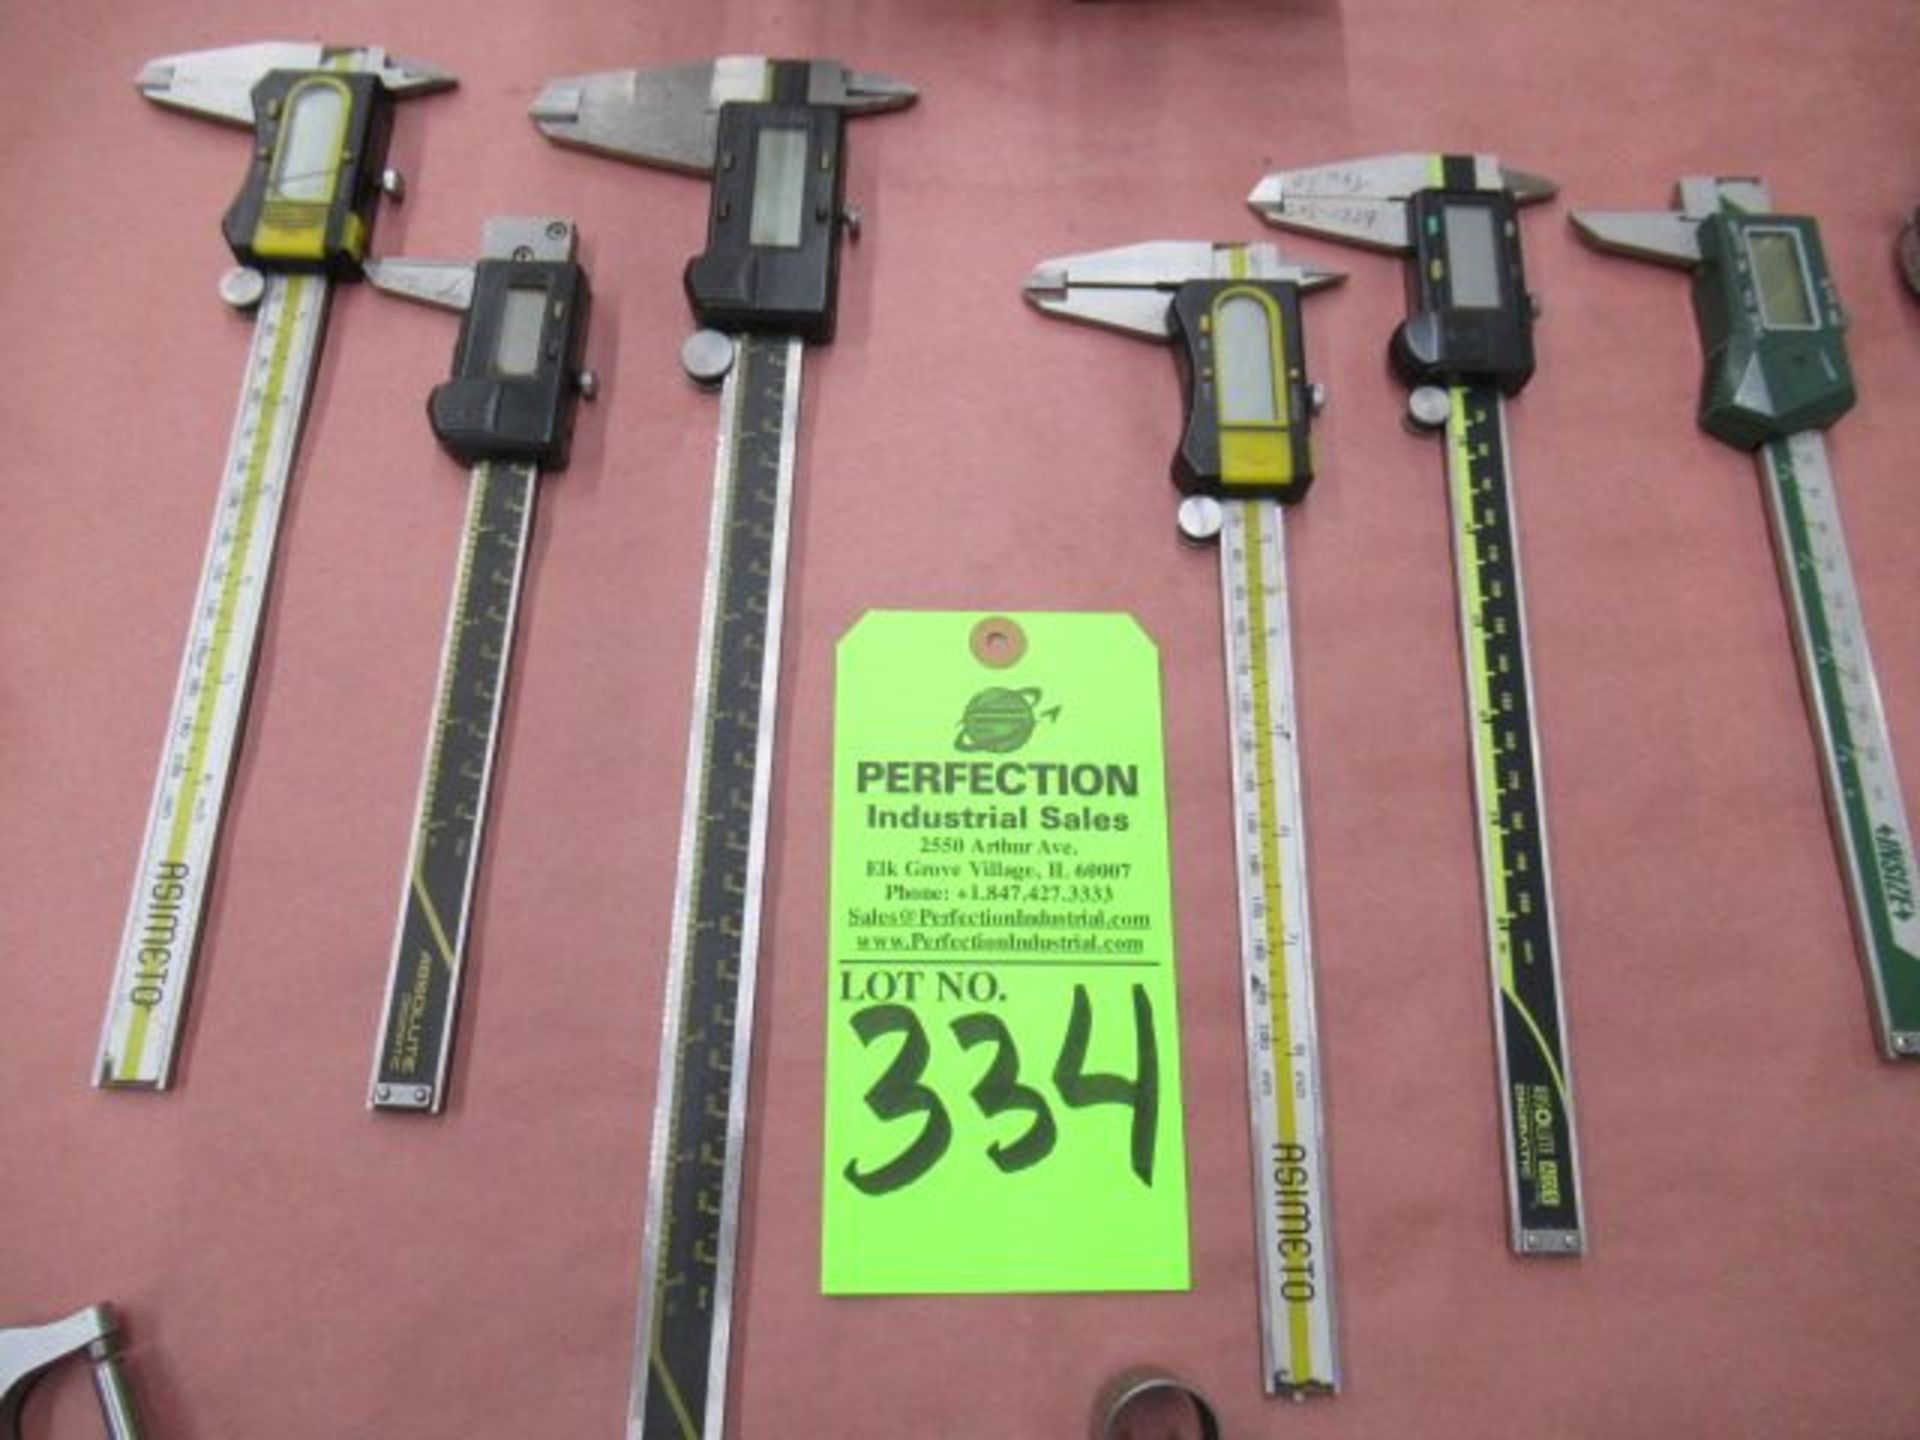 Lot. 6 Calipers & 3 Reference Tools